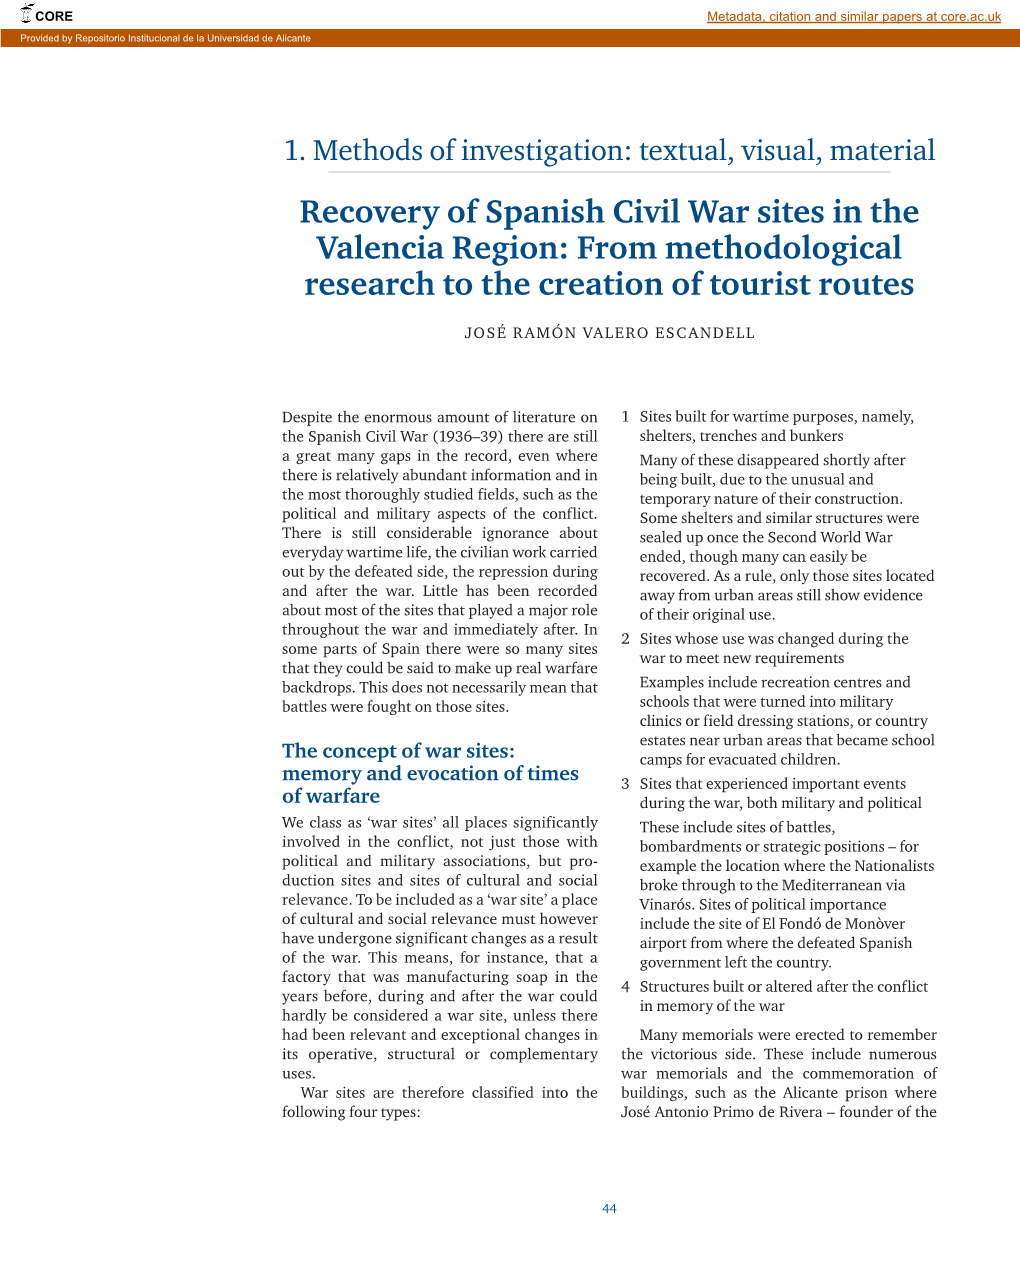 Recovery of Spanish Civil War Sites in the Valencia Region: from Methodological Research to the Creation of Tourist Routes